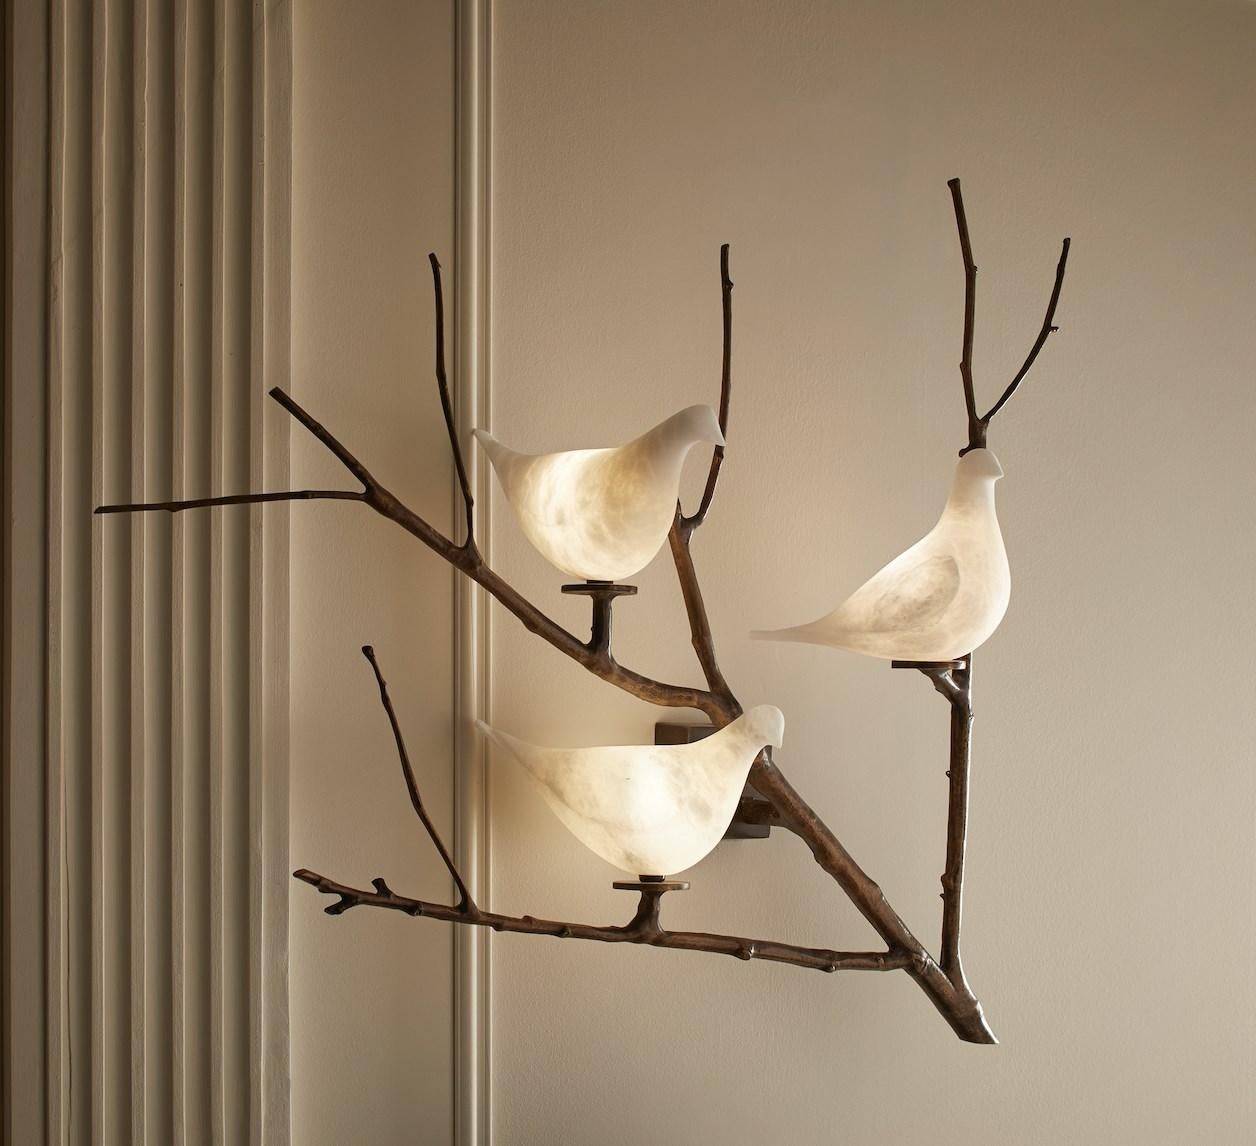 Superb wall light in sculpted and patinated brass with enlightened Doves in alabaster 
2 models available (Branch right or left orientated).
Creation by Studio Glustin